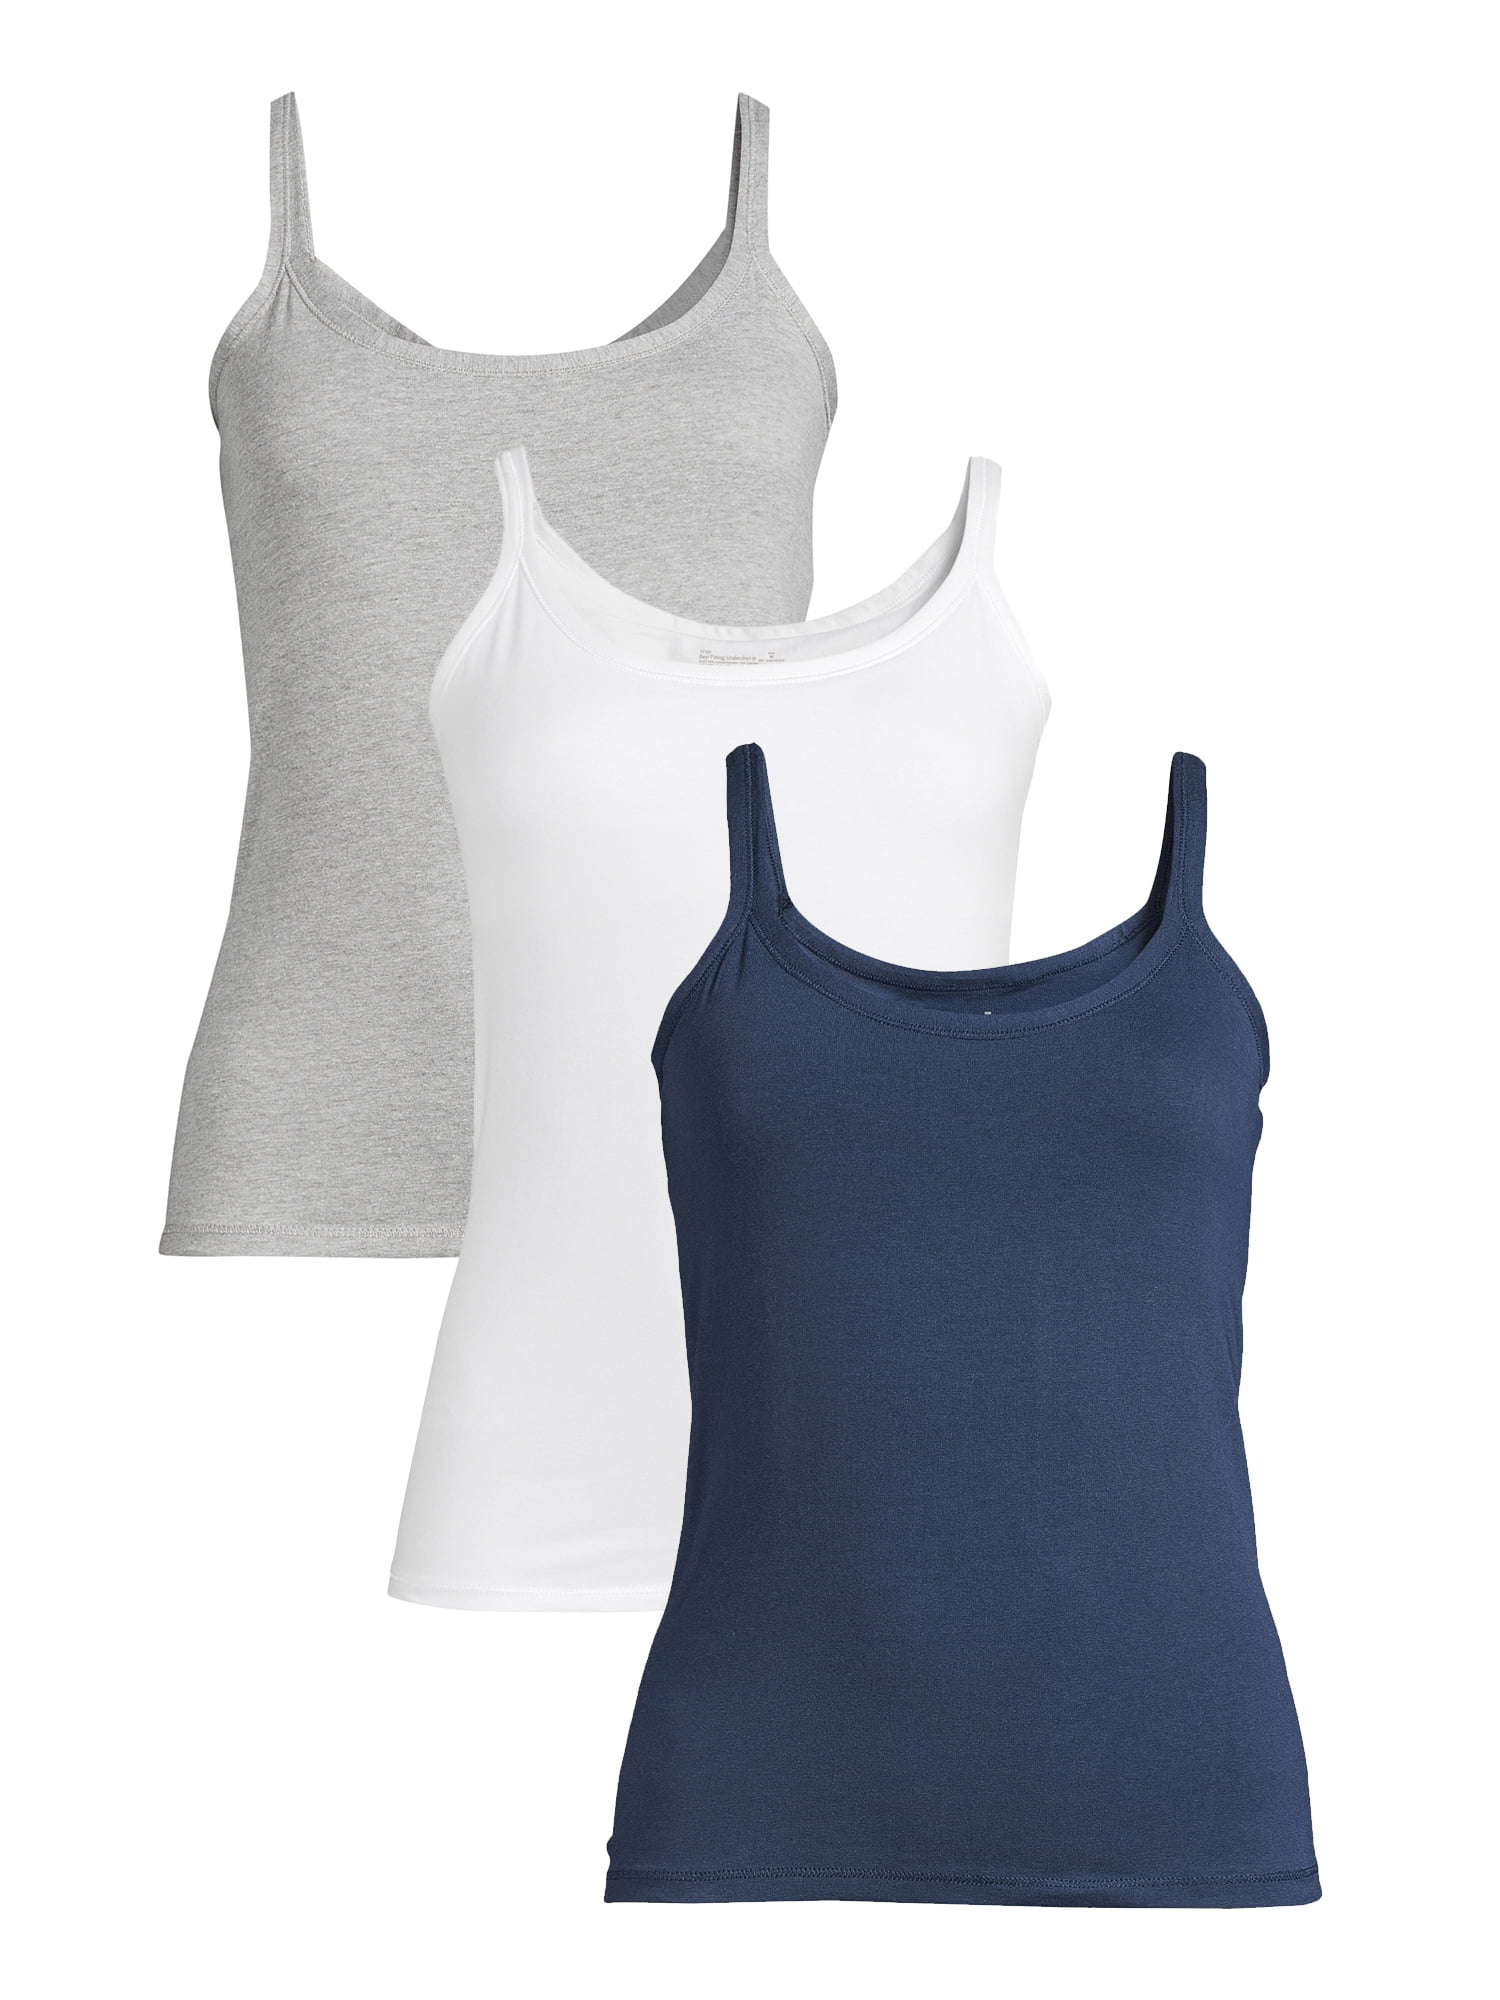  V-Neck Camisole For Women Shelf Bra Tank Tops Slim Fit Cotton  Undershirts Pack Of 2